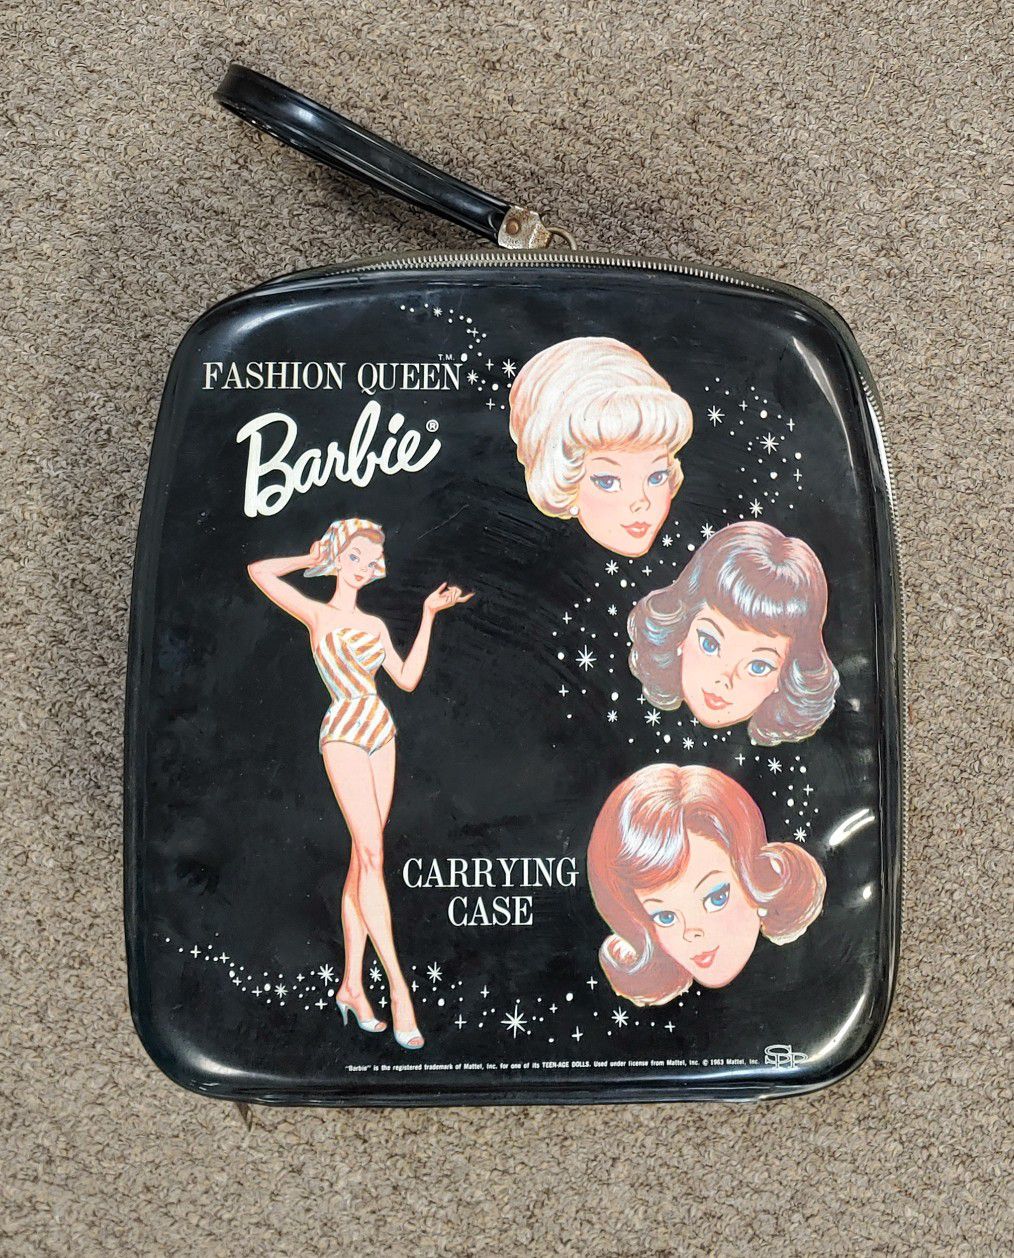 Vintage 1963 Barbie Fashion Queen Carry Case With Barbie Doll & Accessories Firm Price